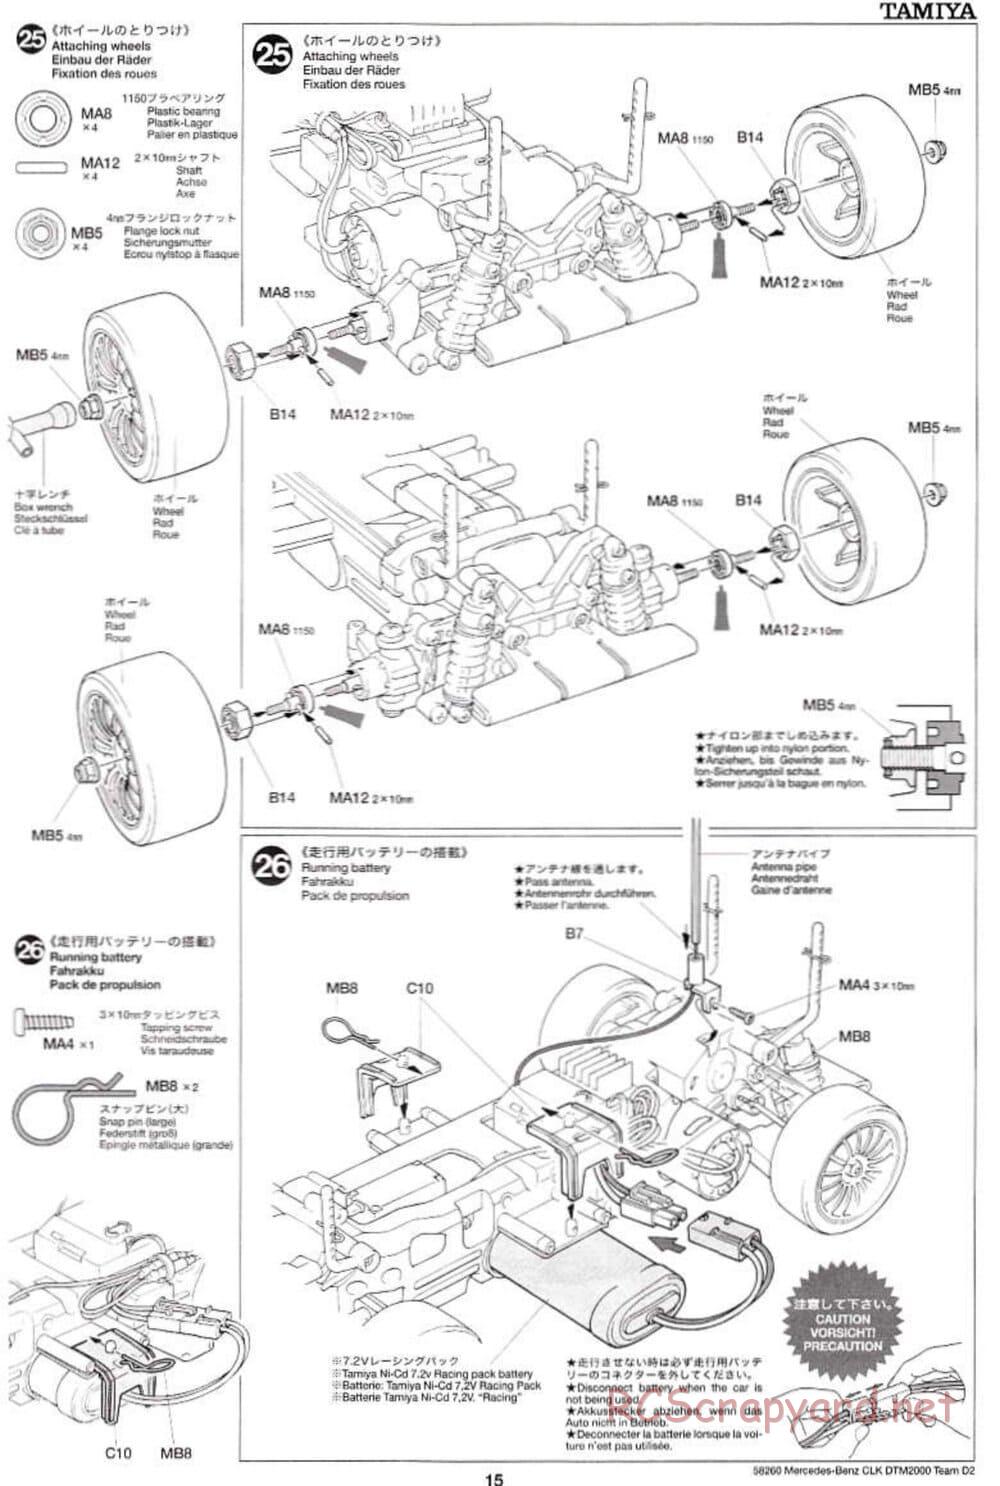 Tamiya - Mercedes Benz CLK DTM 2000 Team D2 - TL-01 Chassis - Manual - Page 15